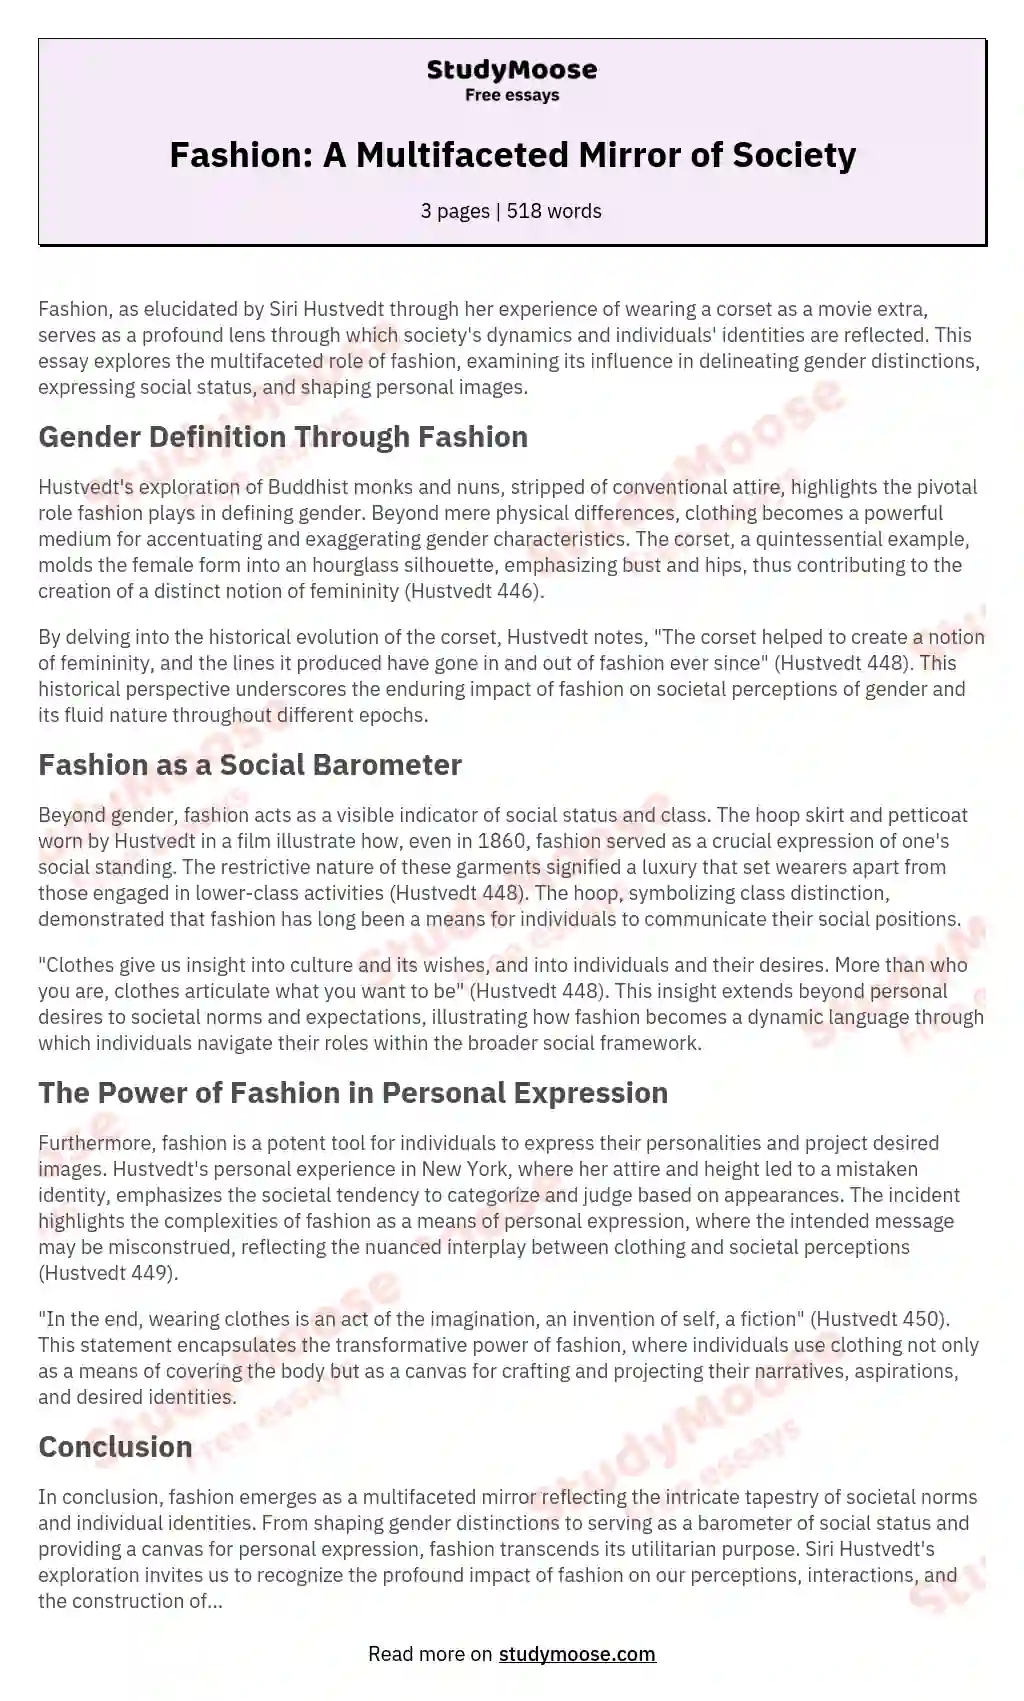 Fashion: A Multifaceted Mirror of Society essay